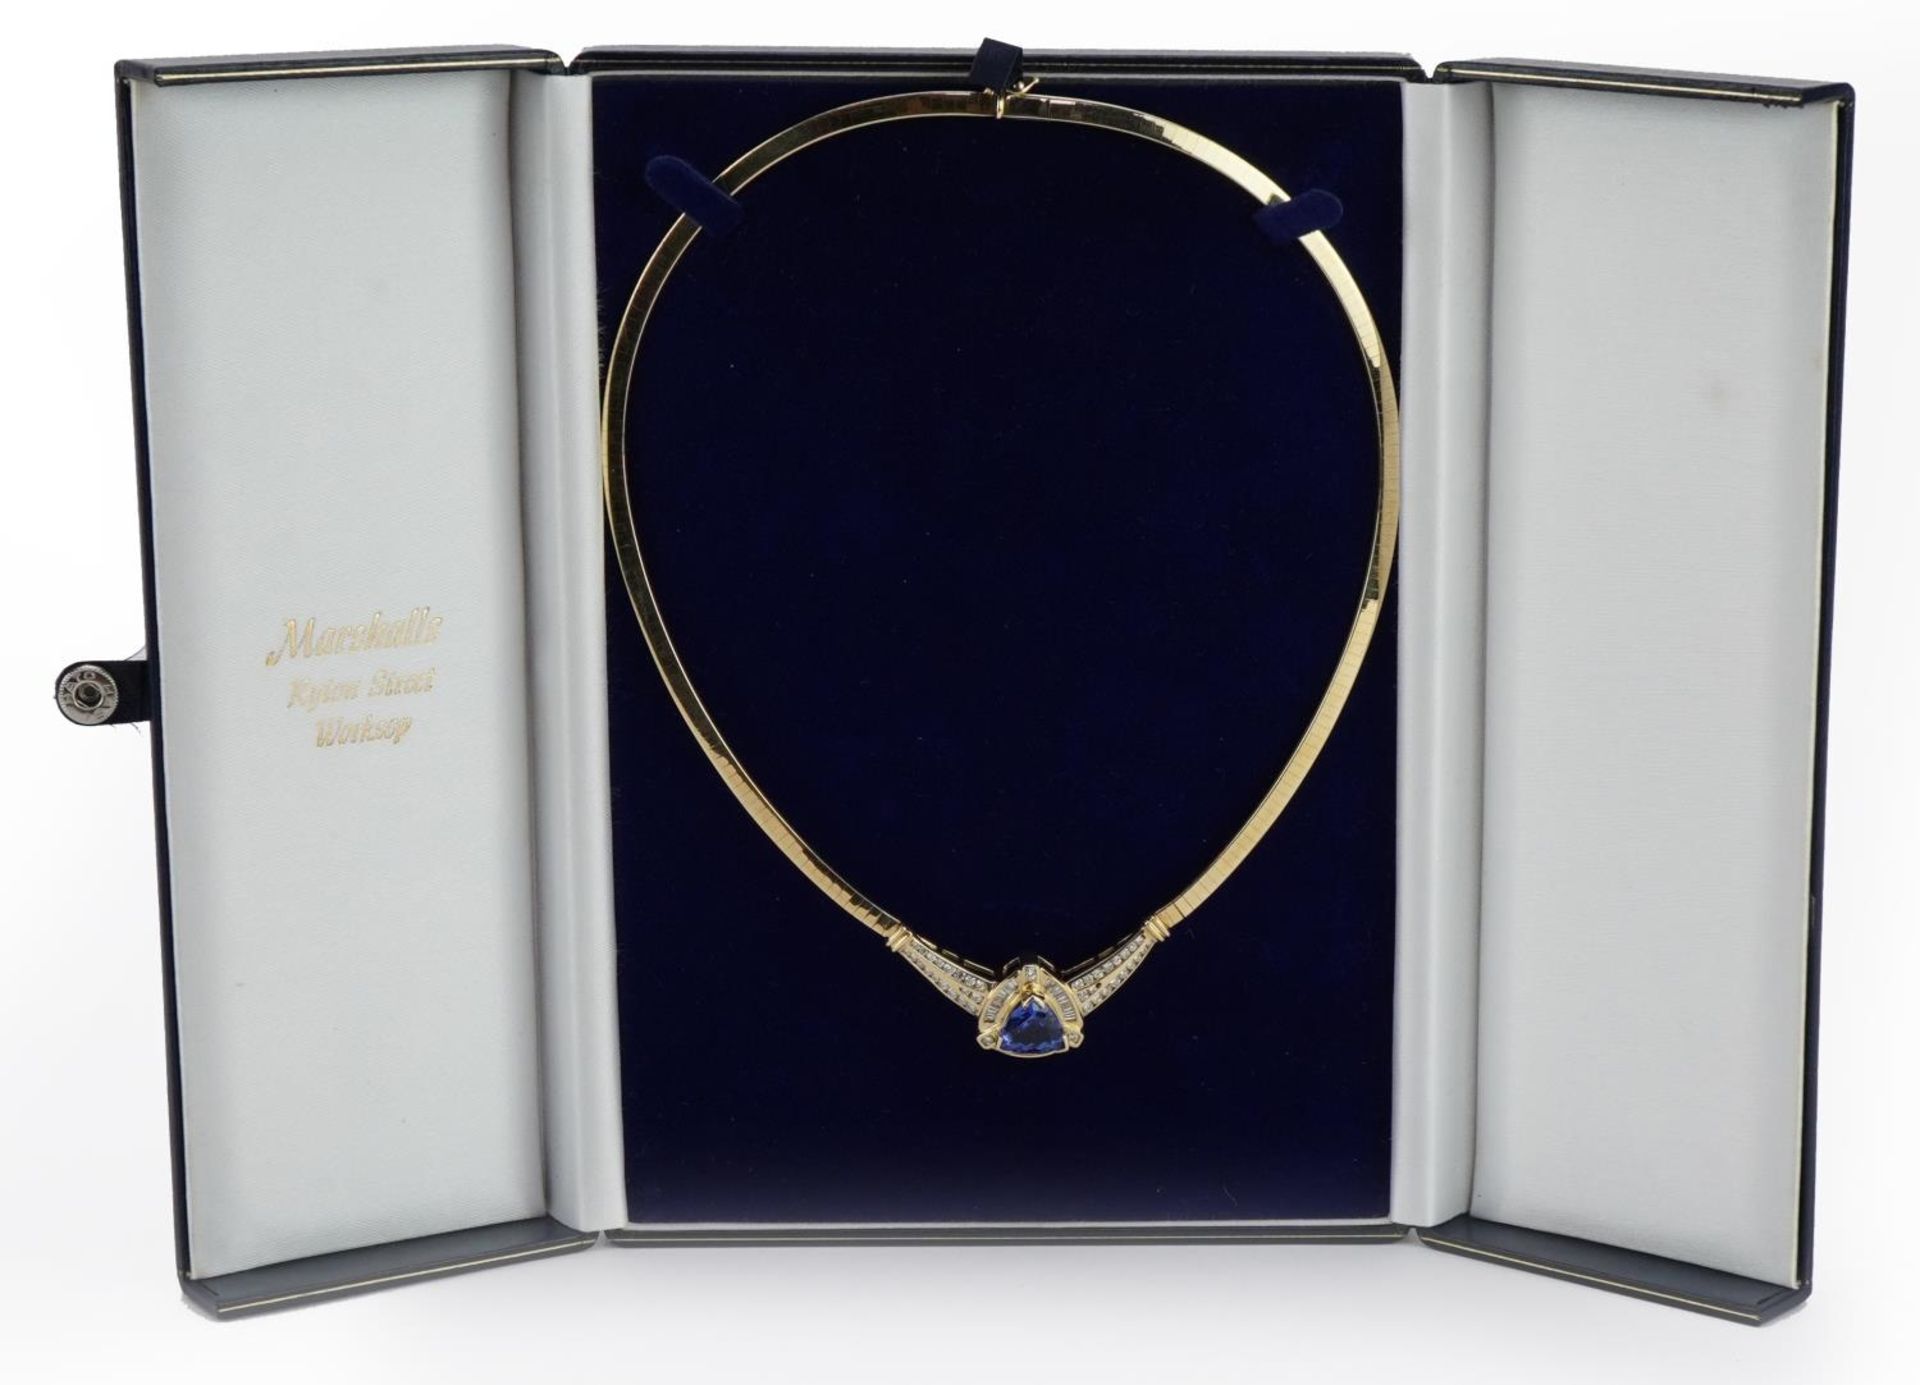 14k gold tanzanite and diamond snake link necklace, the tanzanite approximately 10.5mm x 10.7mm x - Image 5 of 6